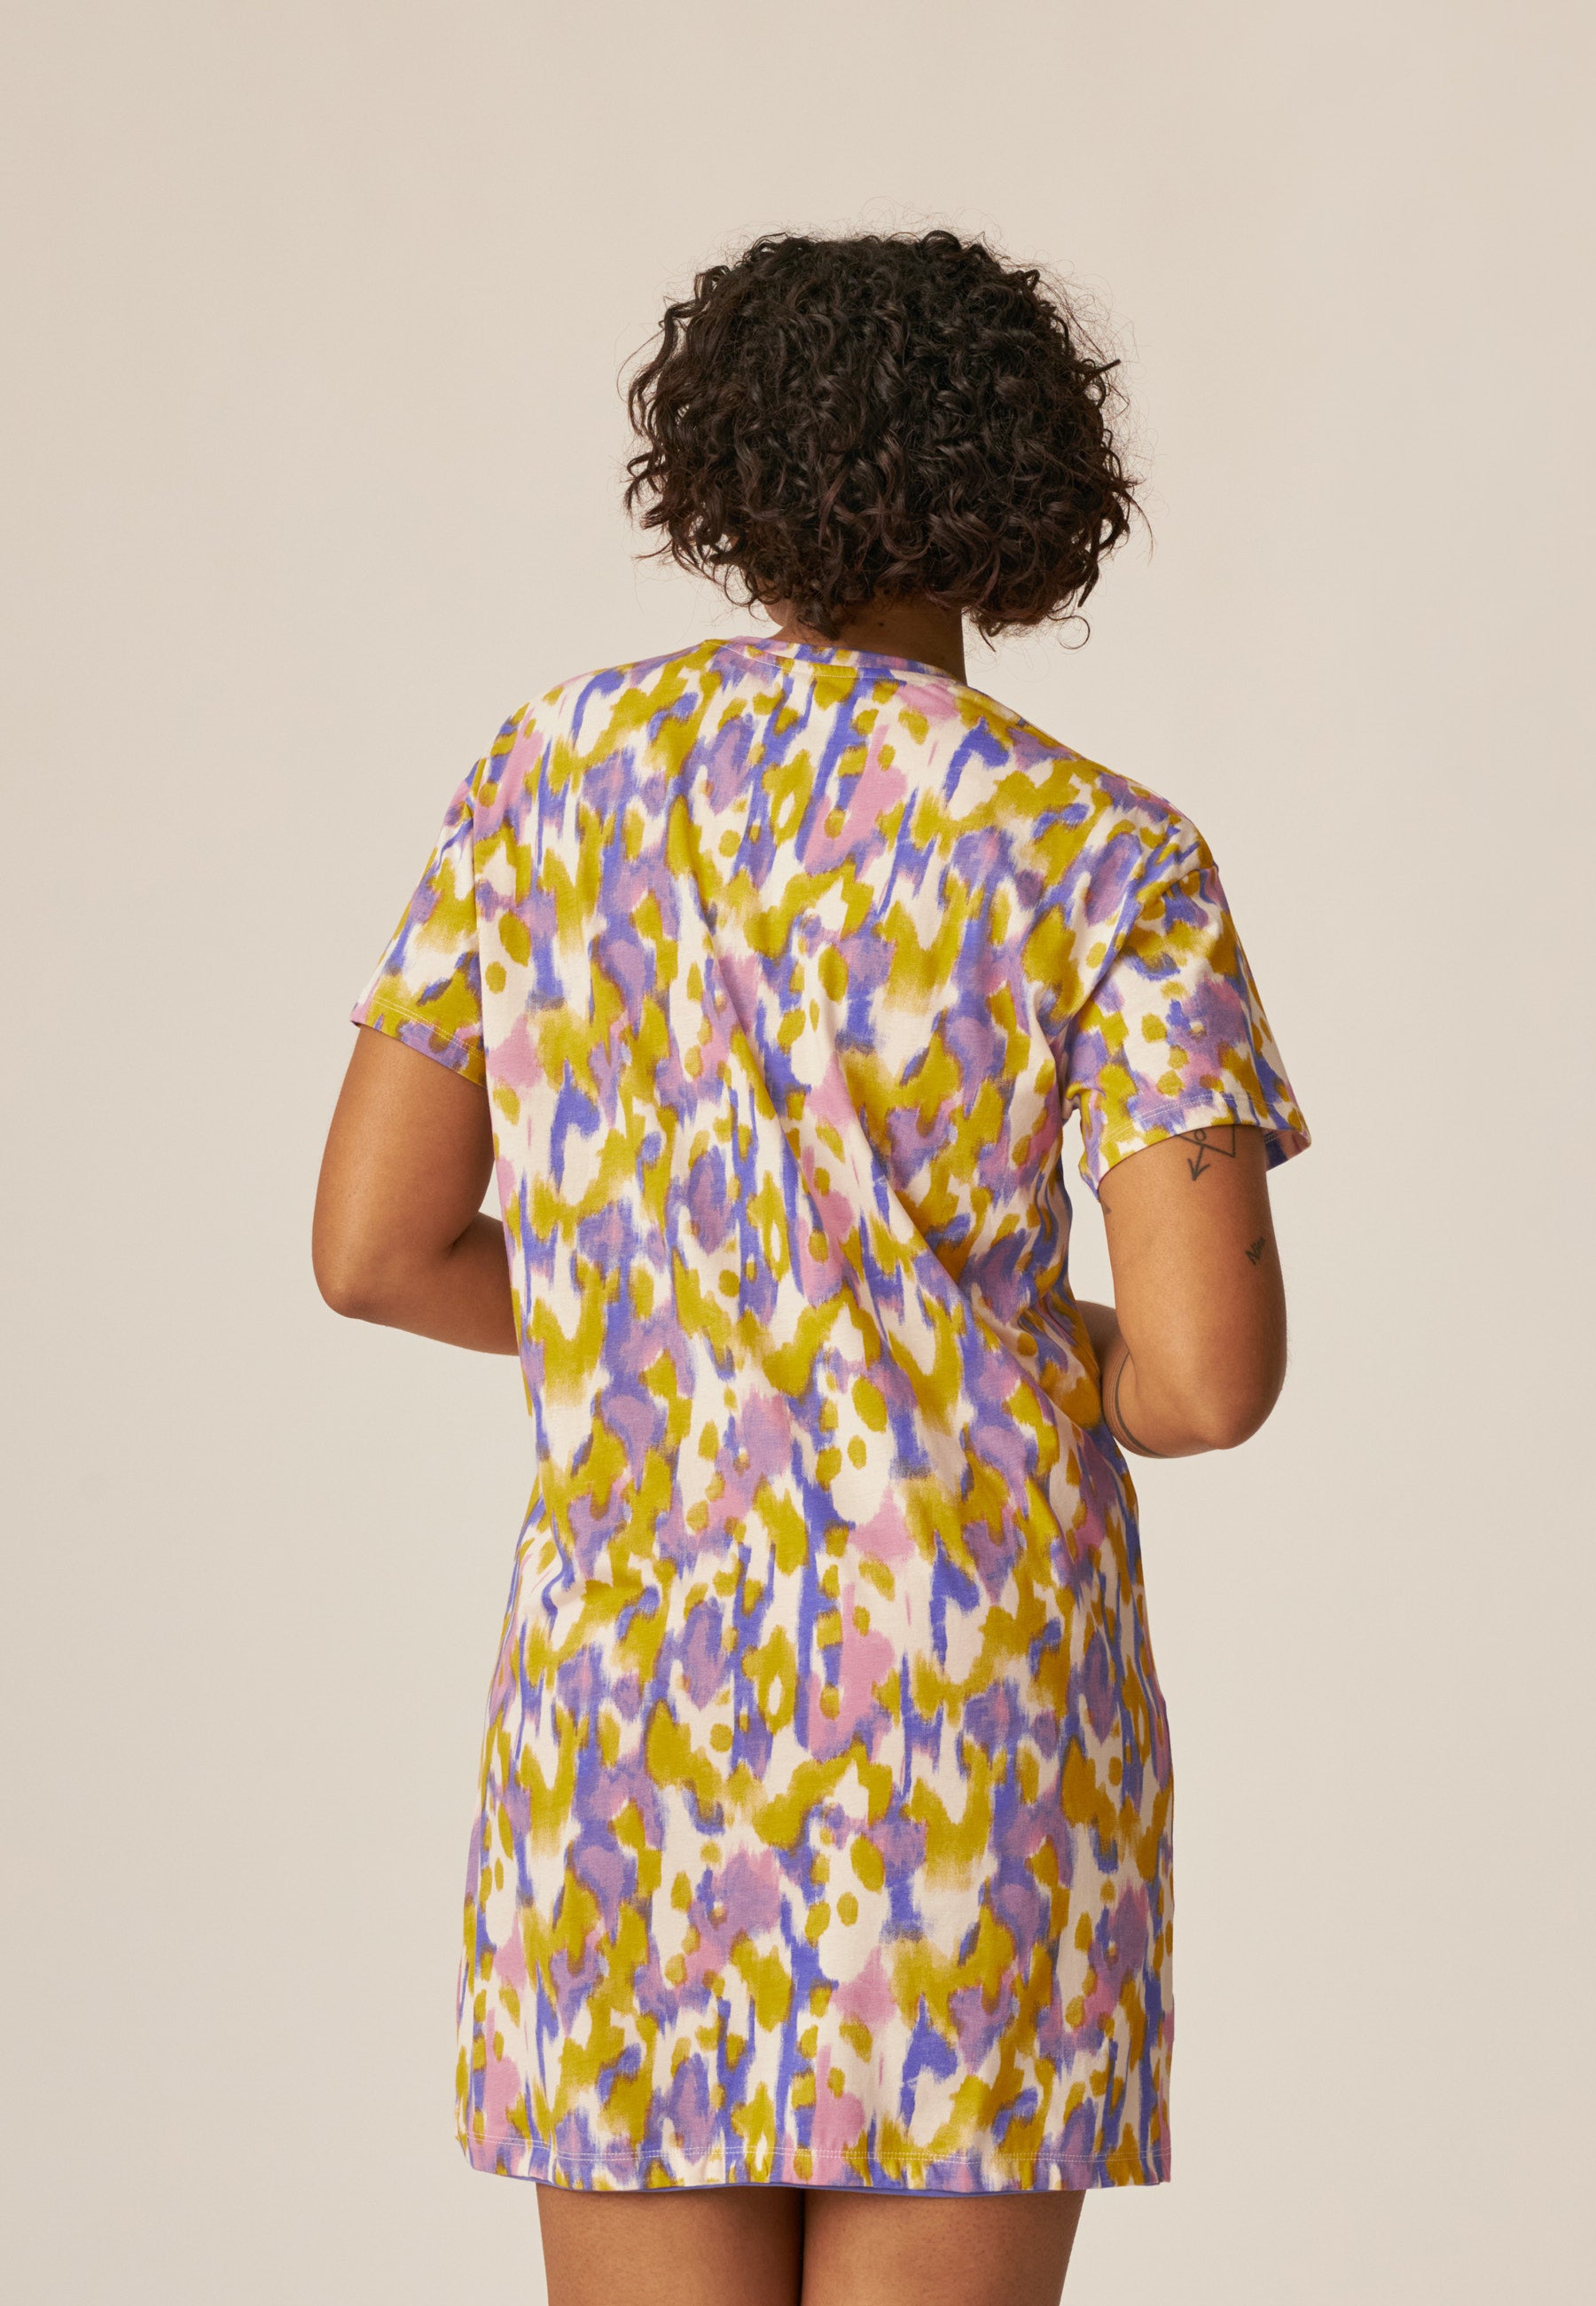 Bigshirt Short Sleeve - Cotton Candy - Smoked Orchid Print